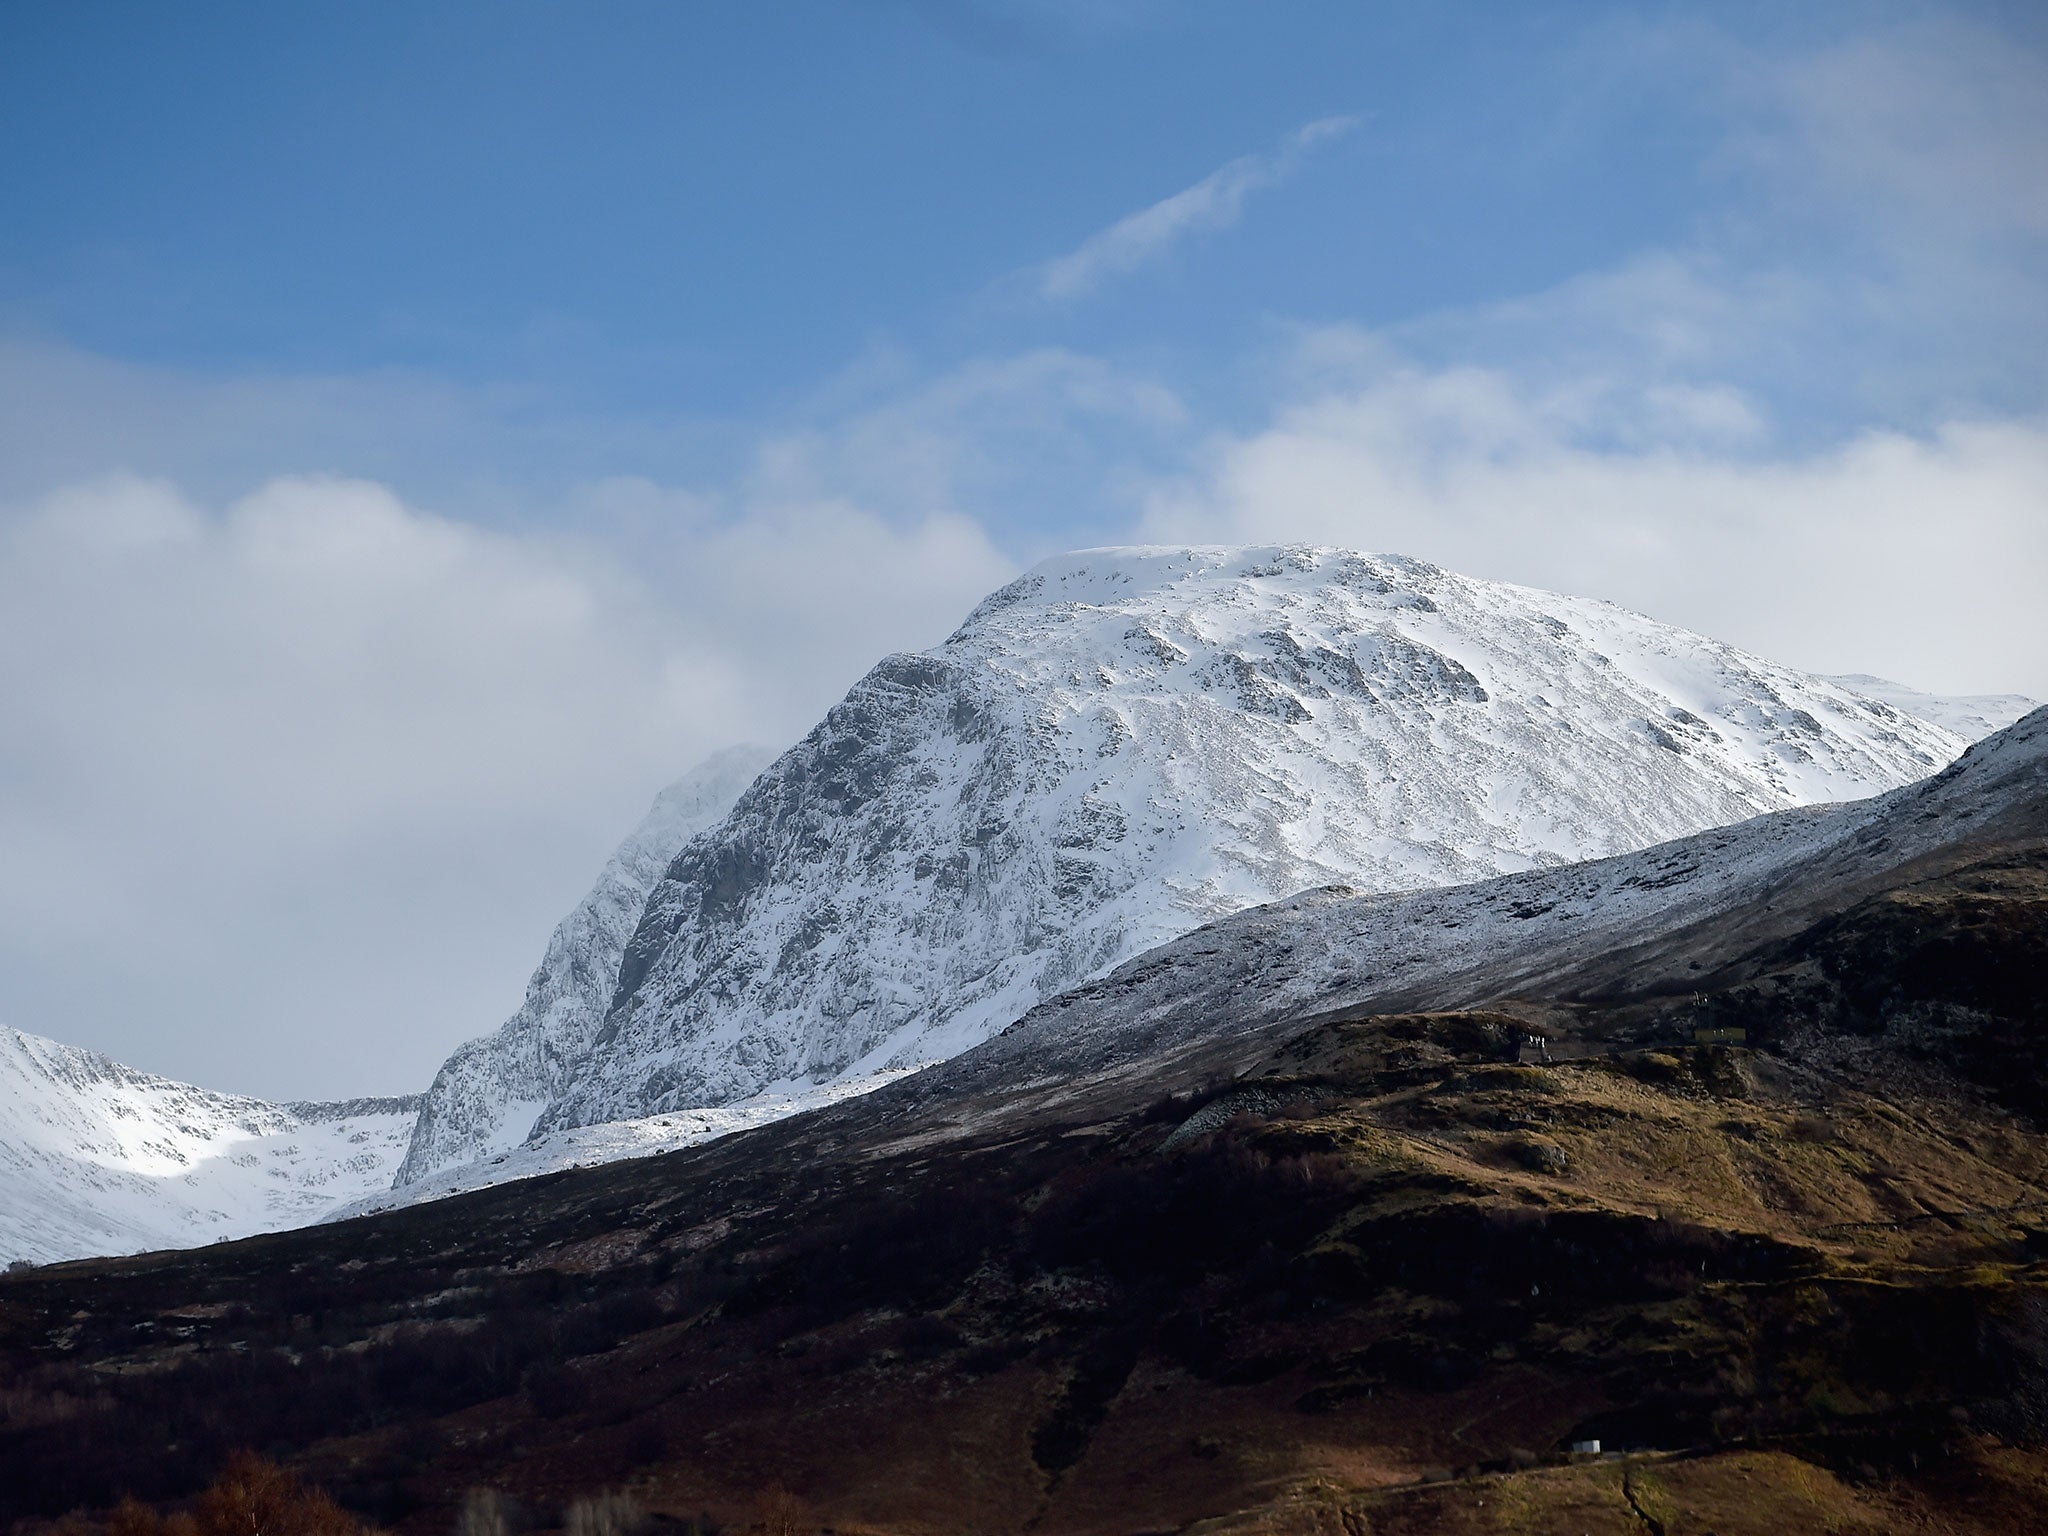 A view of the north ridge of Ben Nevis. A woman from Brighton had to be rescued from the mountain when she attempted to climb it without the appropriate clothing and equipment